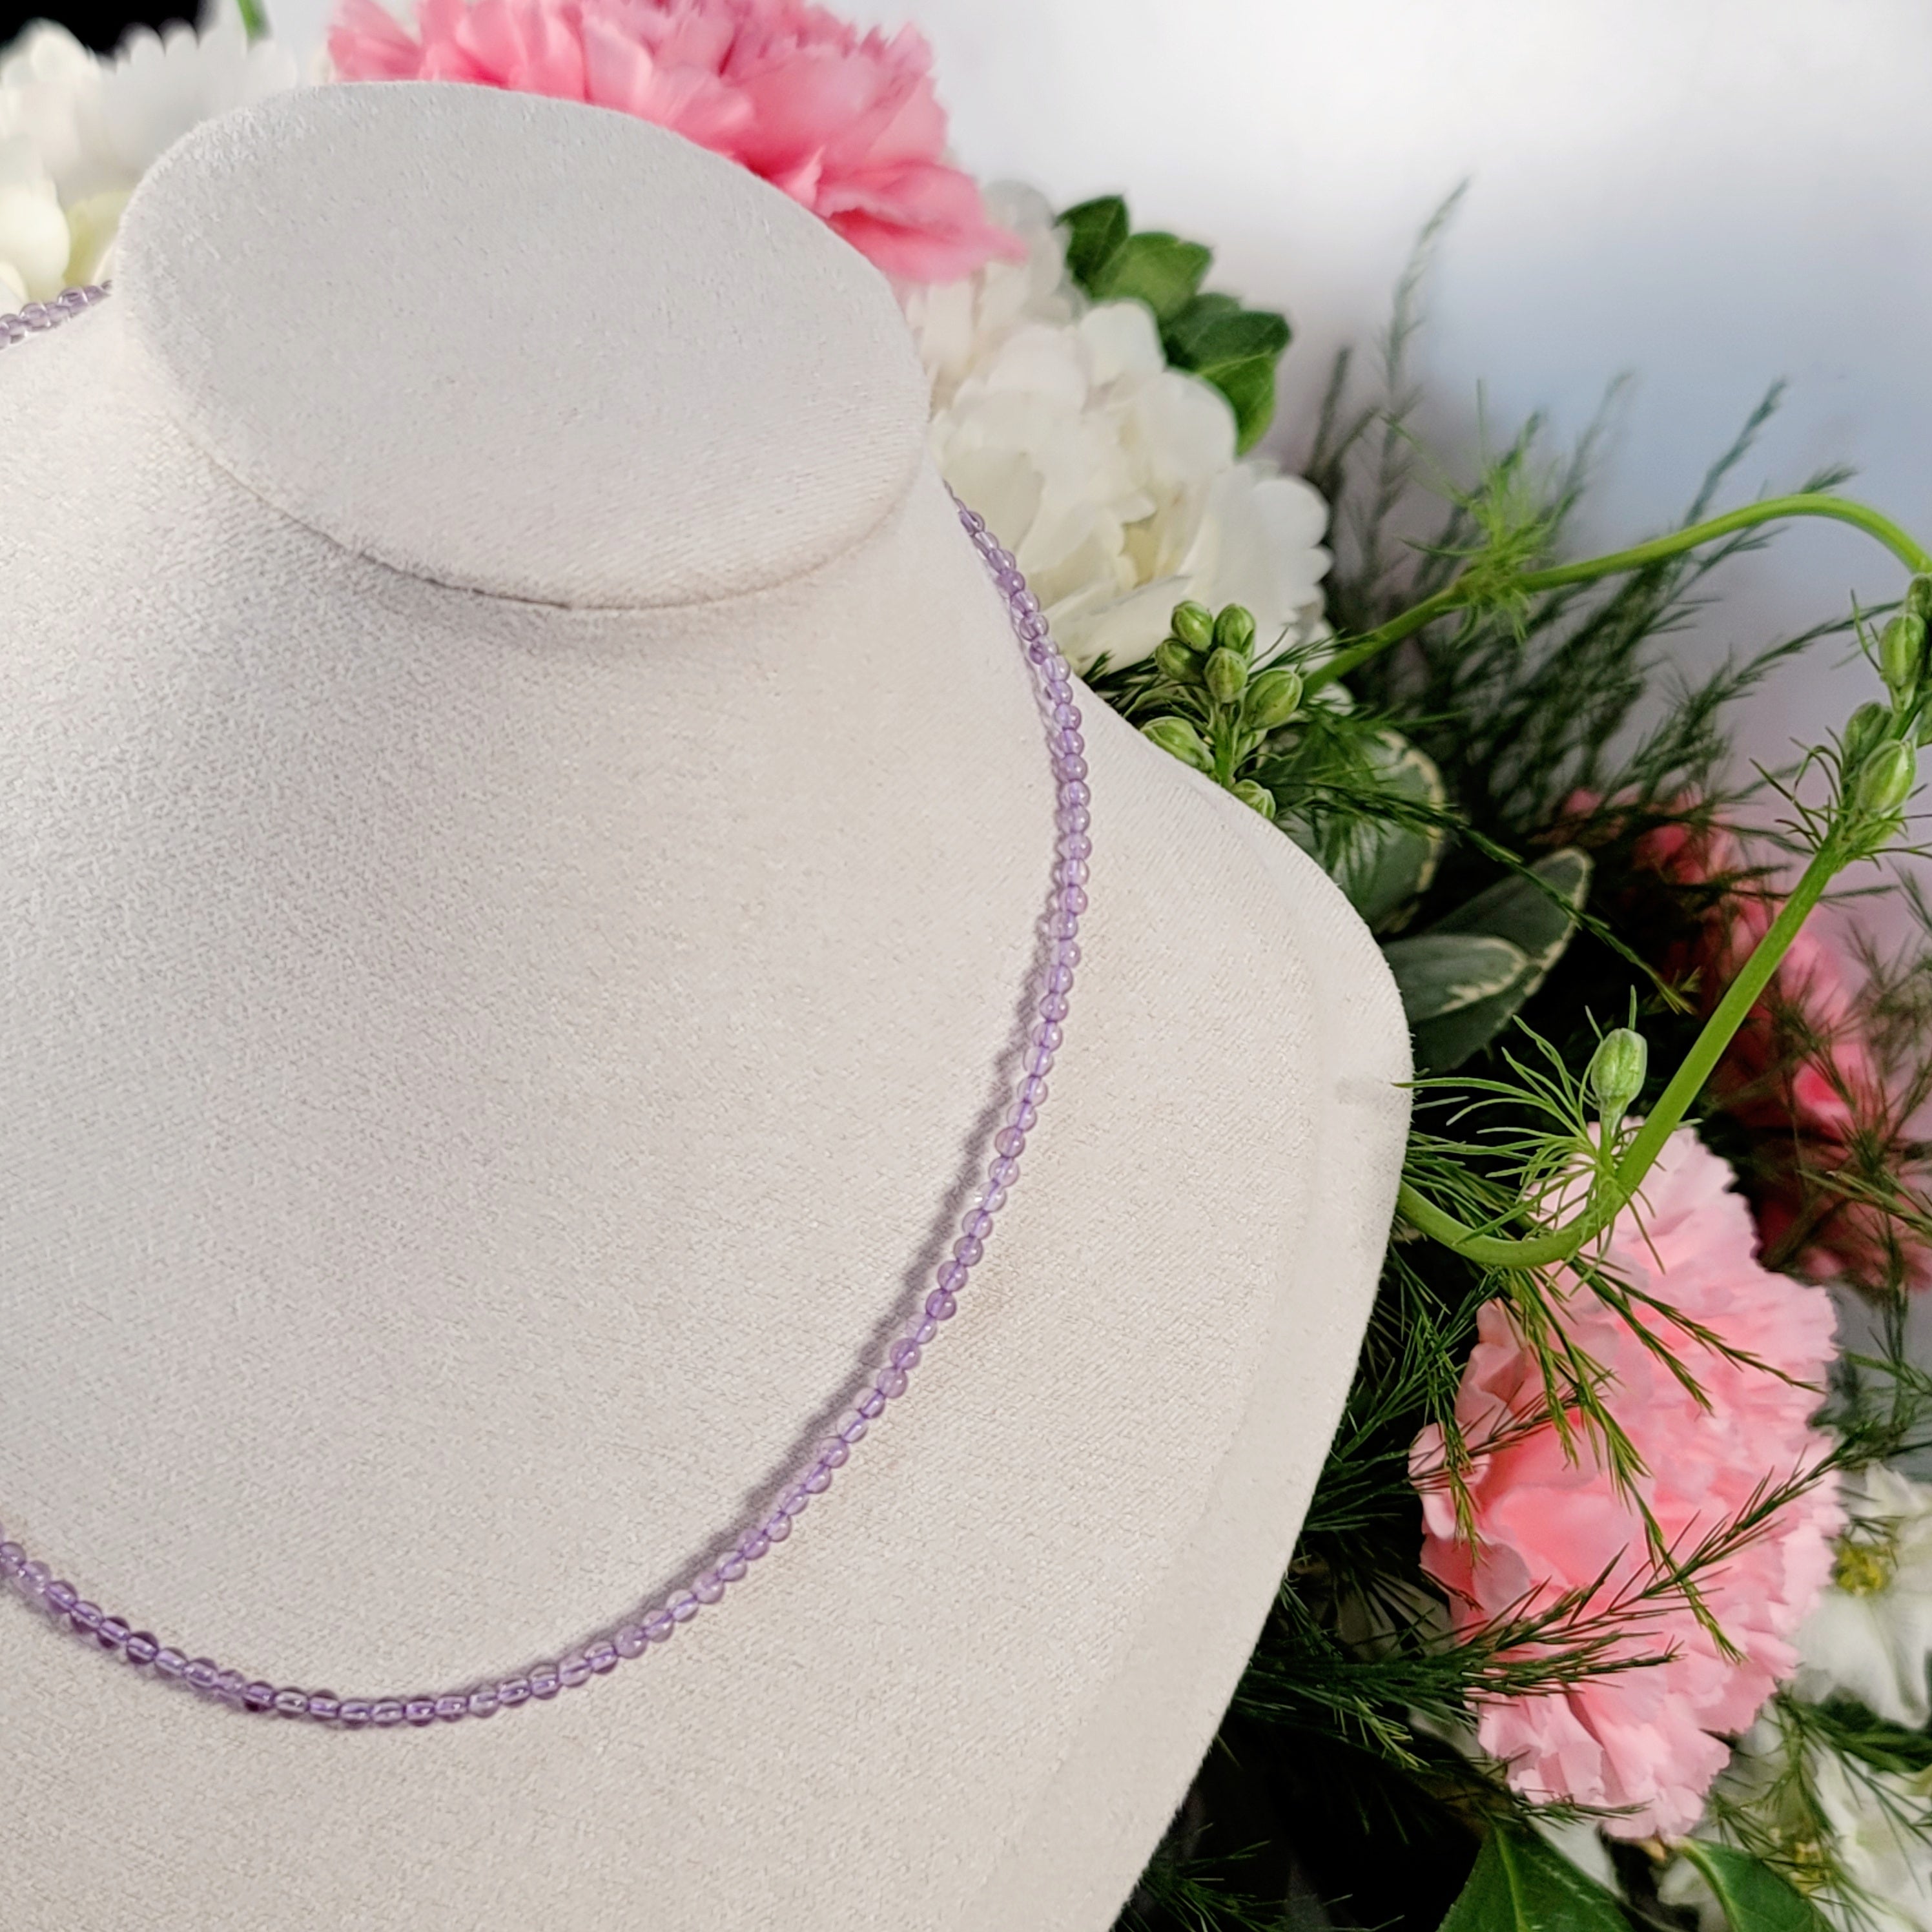 Amethyst Micro Round Choker/Layering Necklace for Enhancing Intuition and Connecting with Source Energy